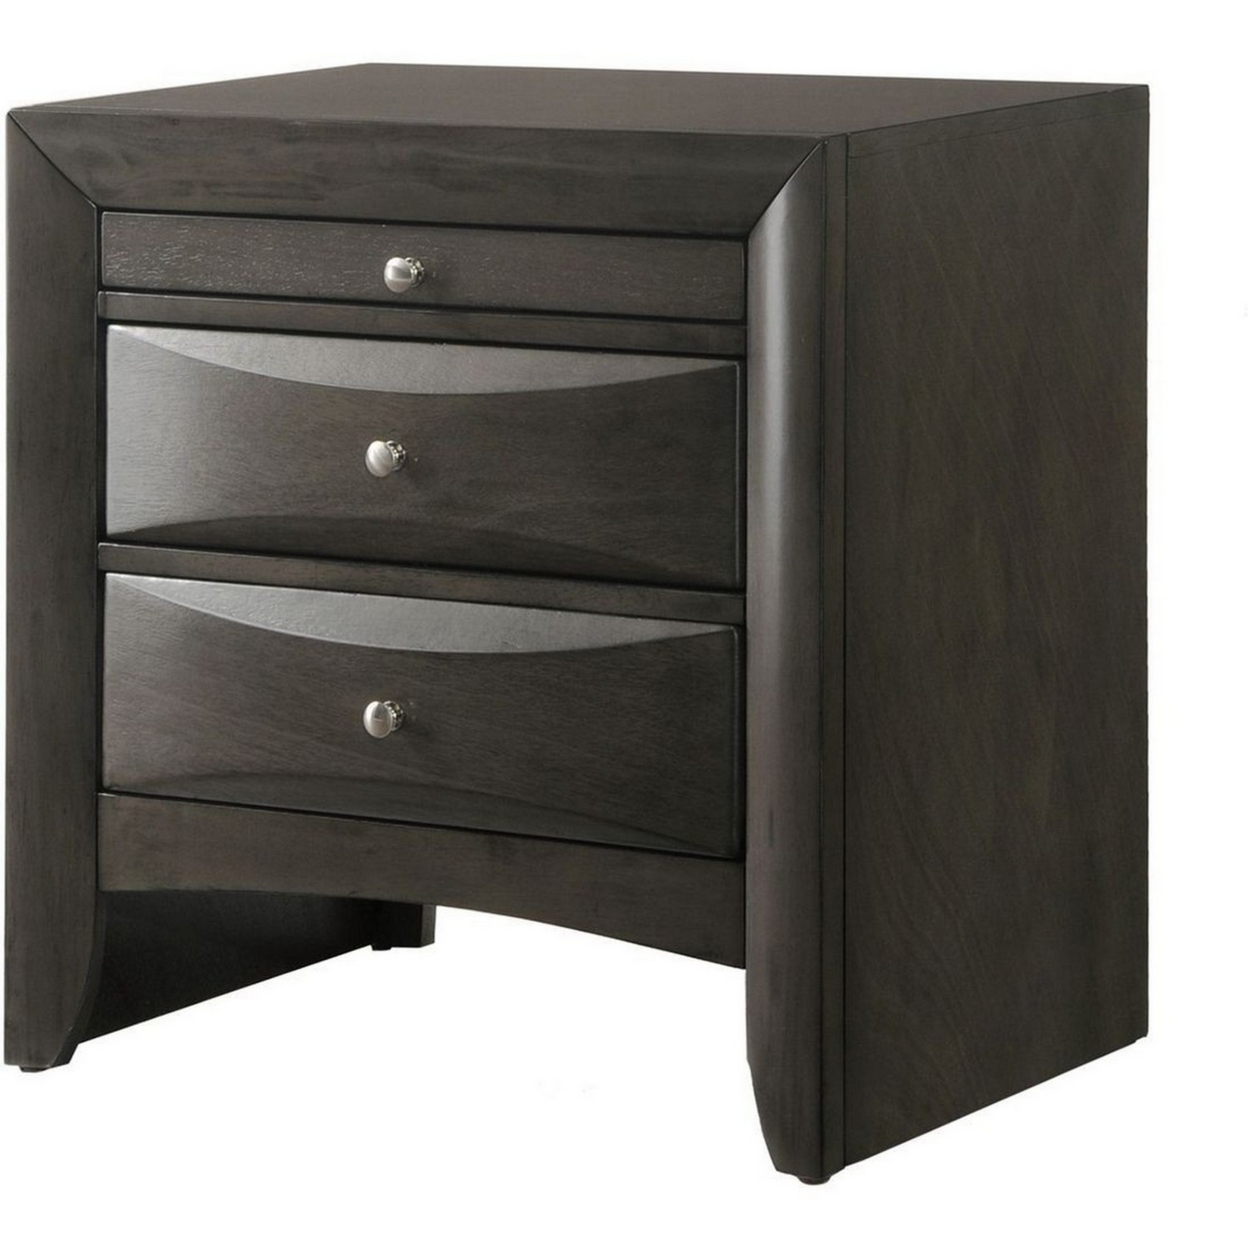 Wooden Nightstand With Two Drawers And Pull Out Tray, Brown- Saltoro Sherpi